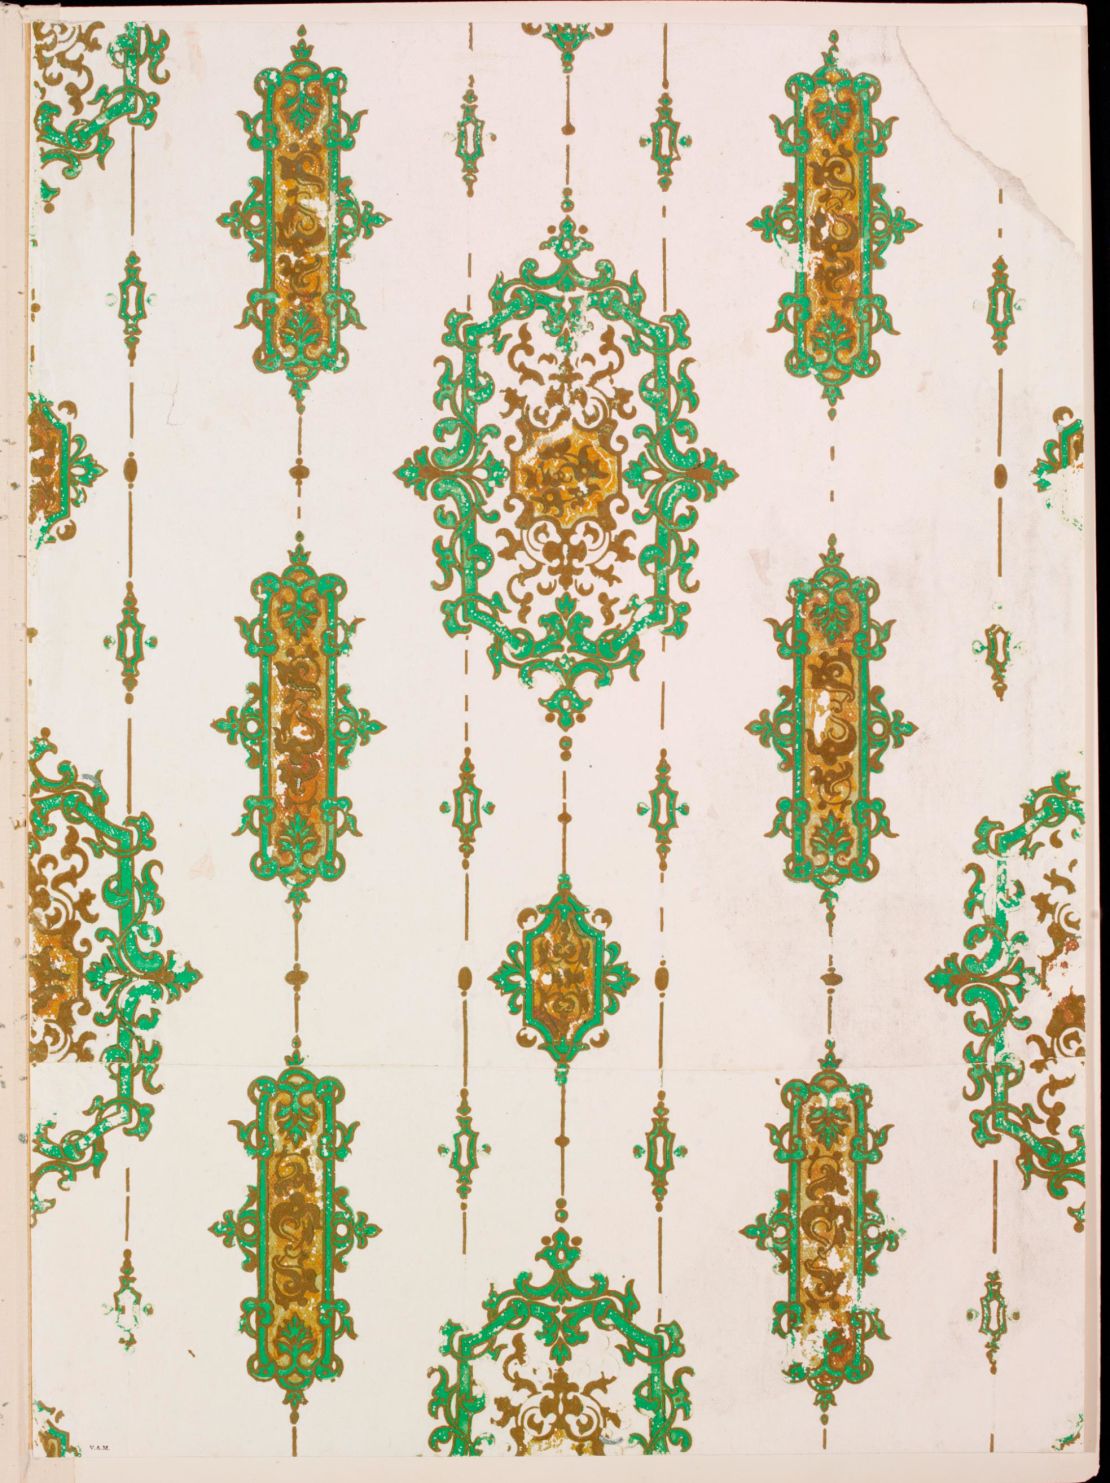 Arsenic-laced wallpaper with an arabesque pattern, printed with a special pigment called Scheele's Green in the early 19th century.